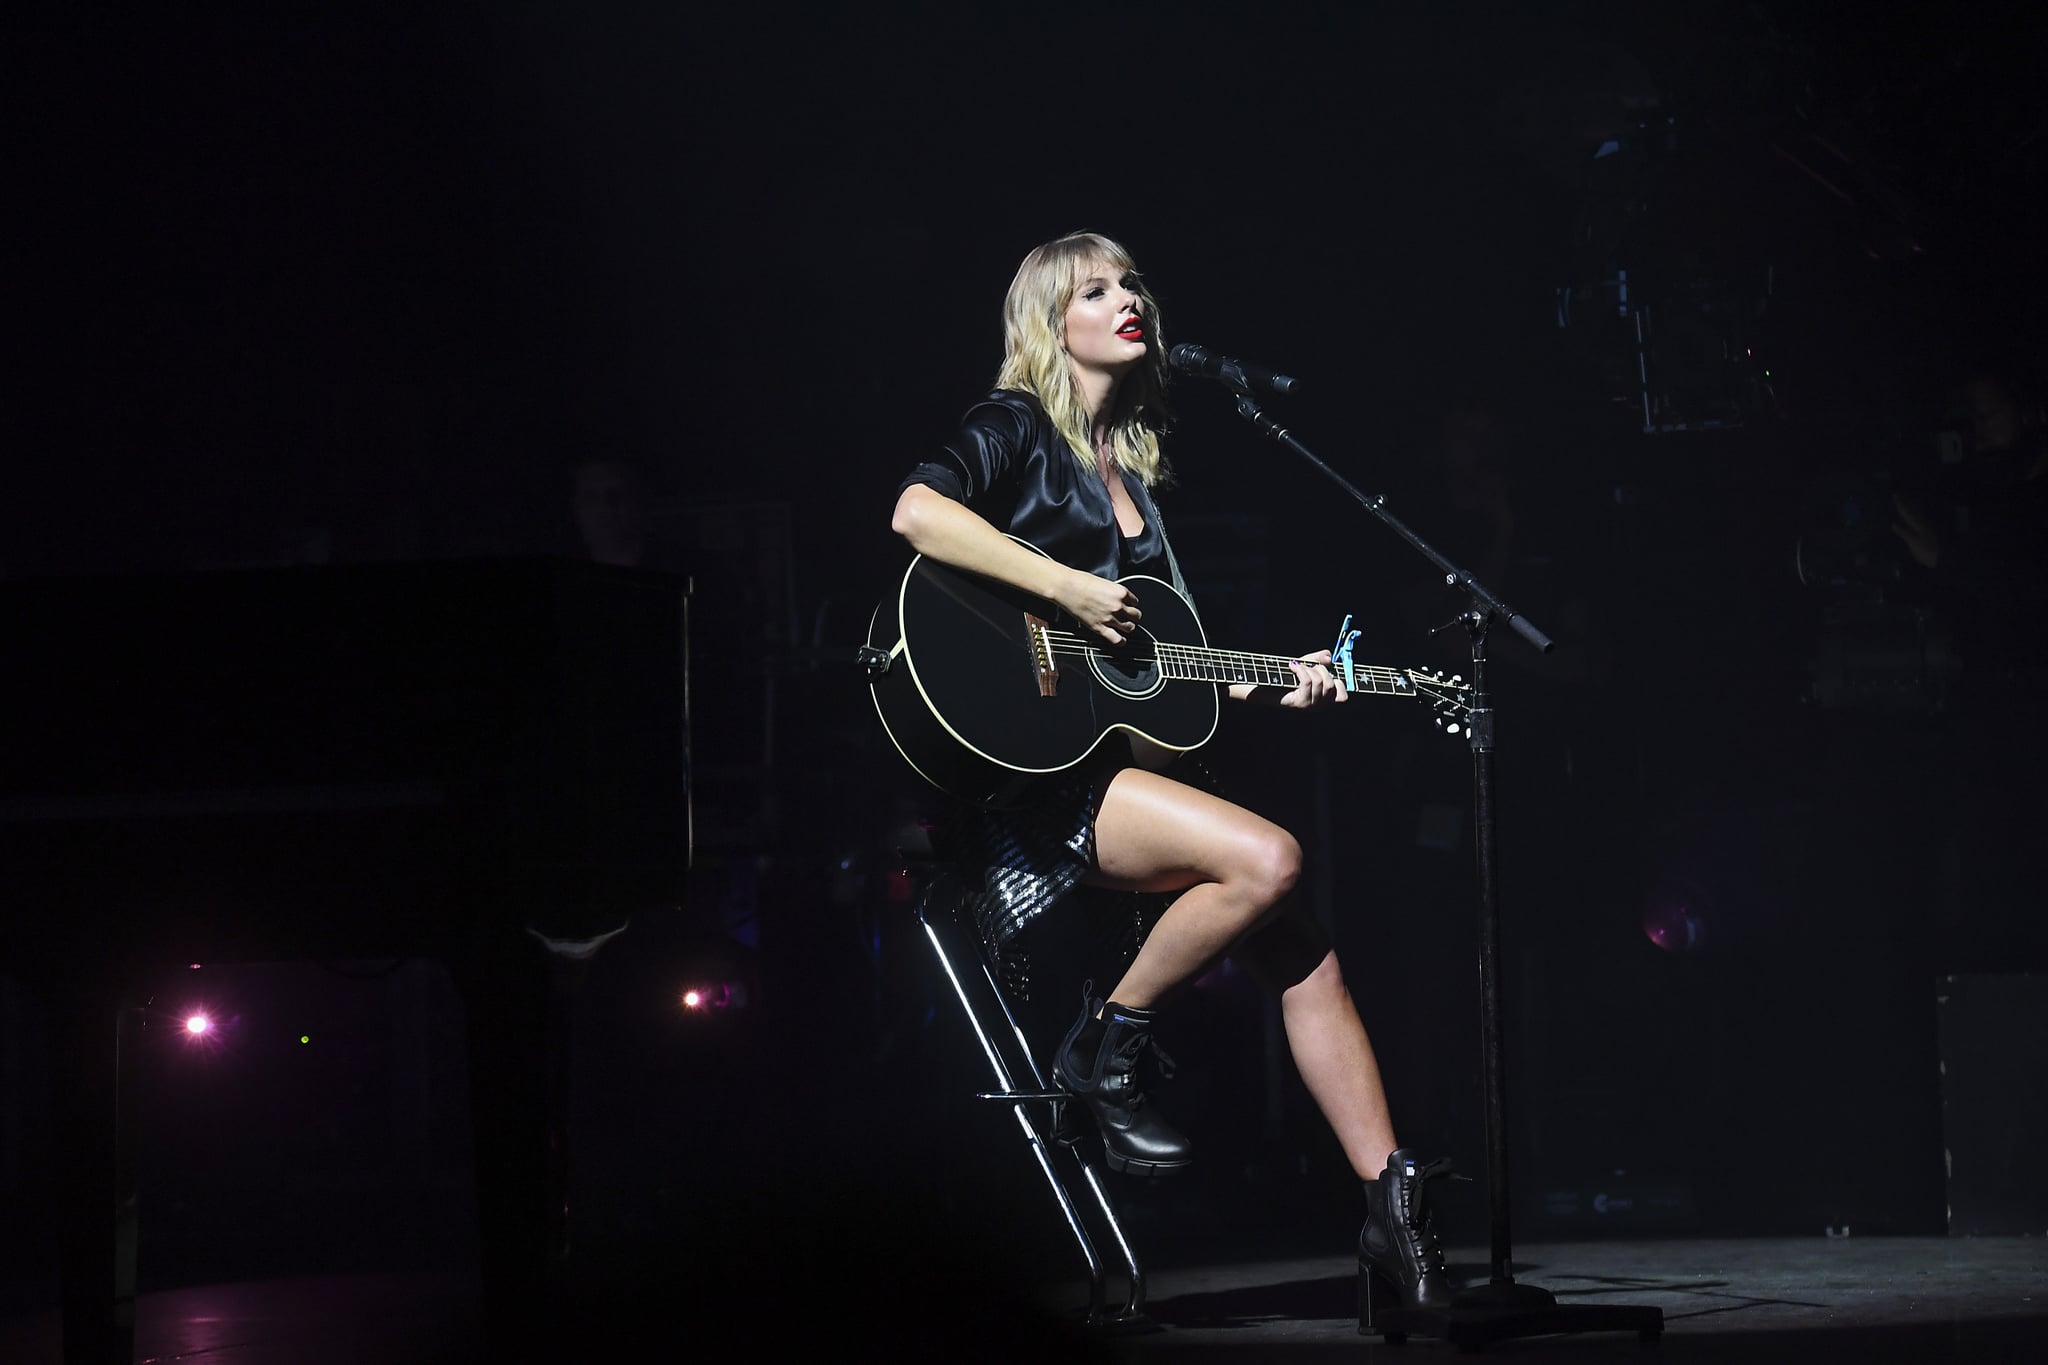 PARIS, FRANCE - SEPTEMBER 09: (EDITORS NOTE: Image approved by Artist) Taylor Swift performs during the